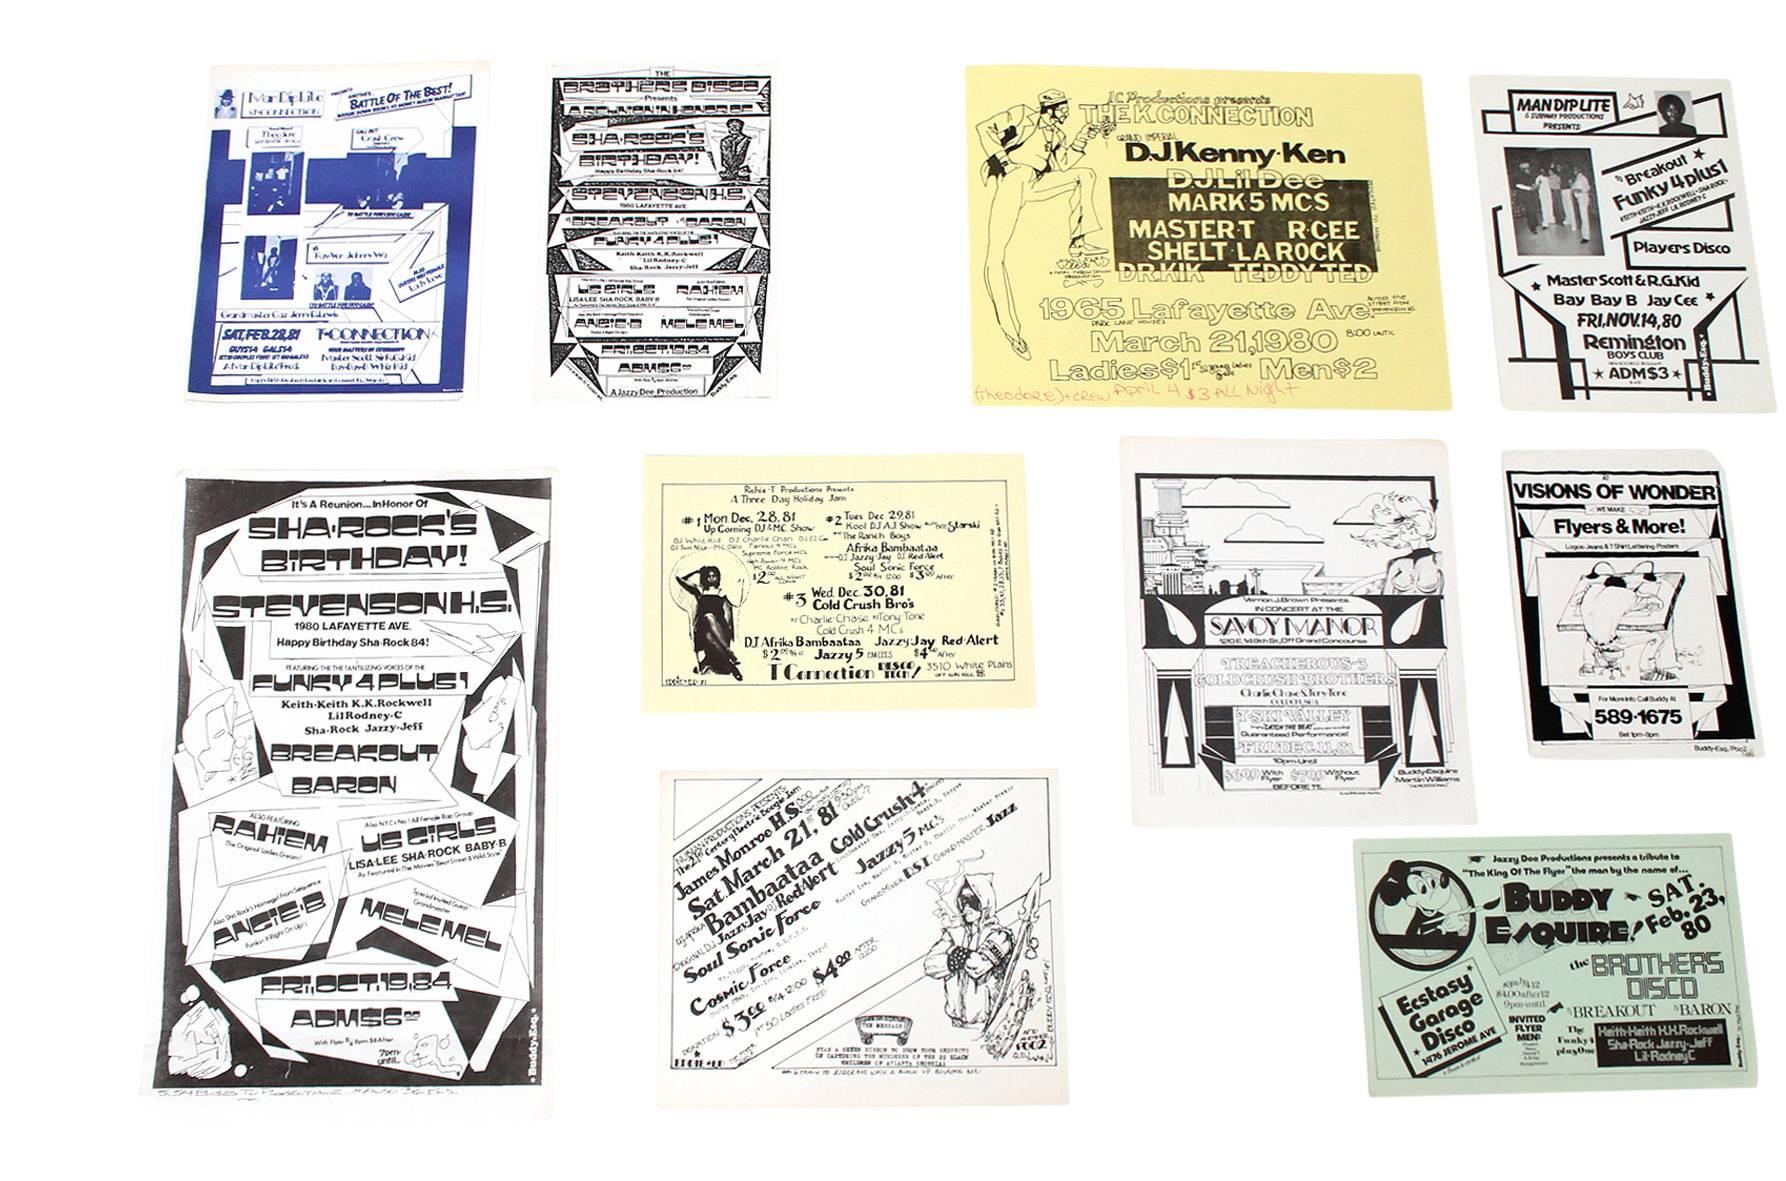 Post-Modern Collection of Early Hip Hop Flyers by Buddy Esquire and Eddie Ed